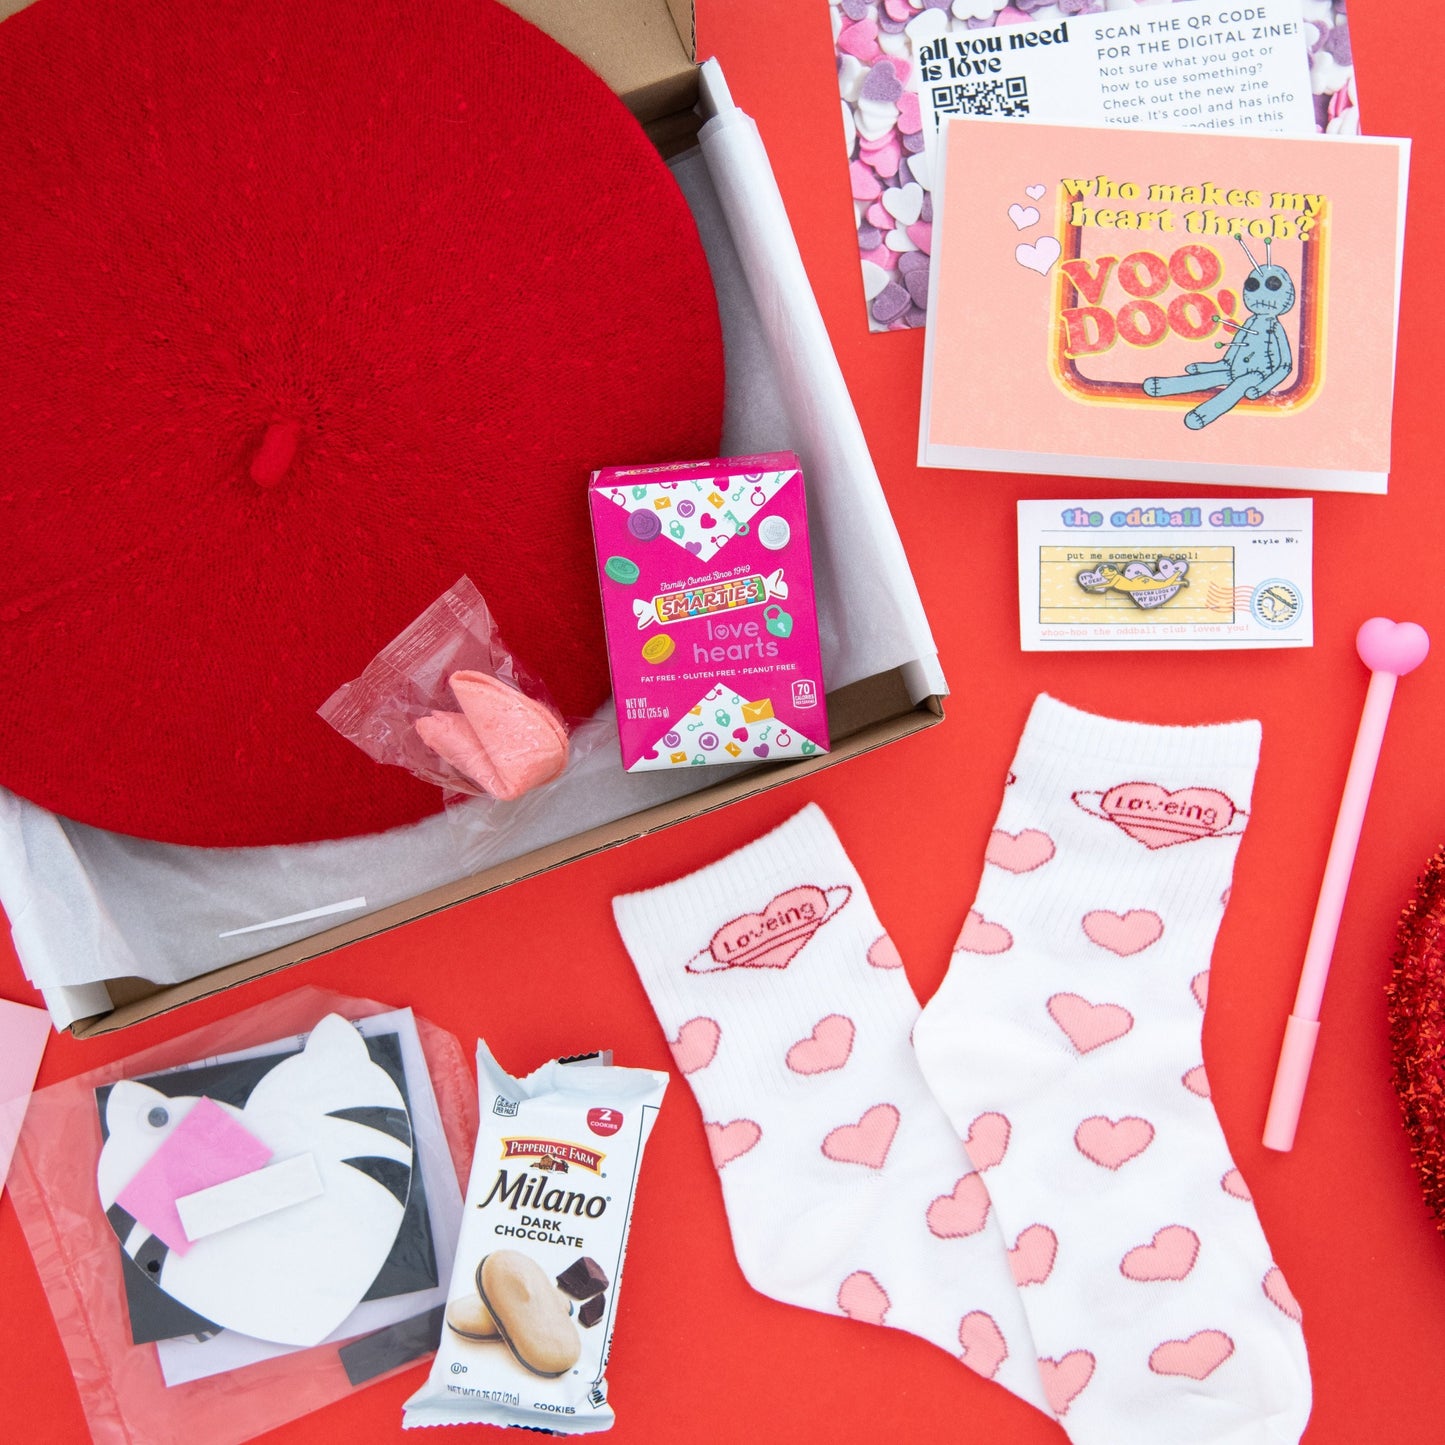 Love Subscription Box: heart-patterned socks with loving words, Smarties conversation heart candies box, pink fortune cookie, peach voodoo greeting card with a voodoo doll with pins, enamel pin, red French beret, heart pen, and a French beret delivered to your door